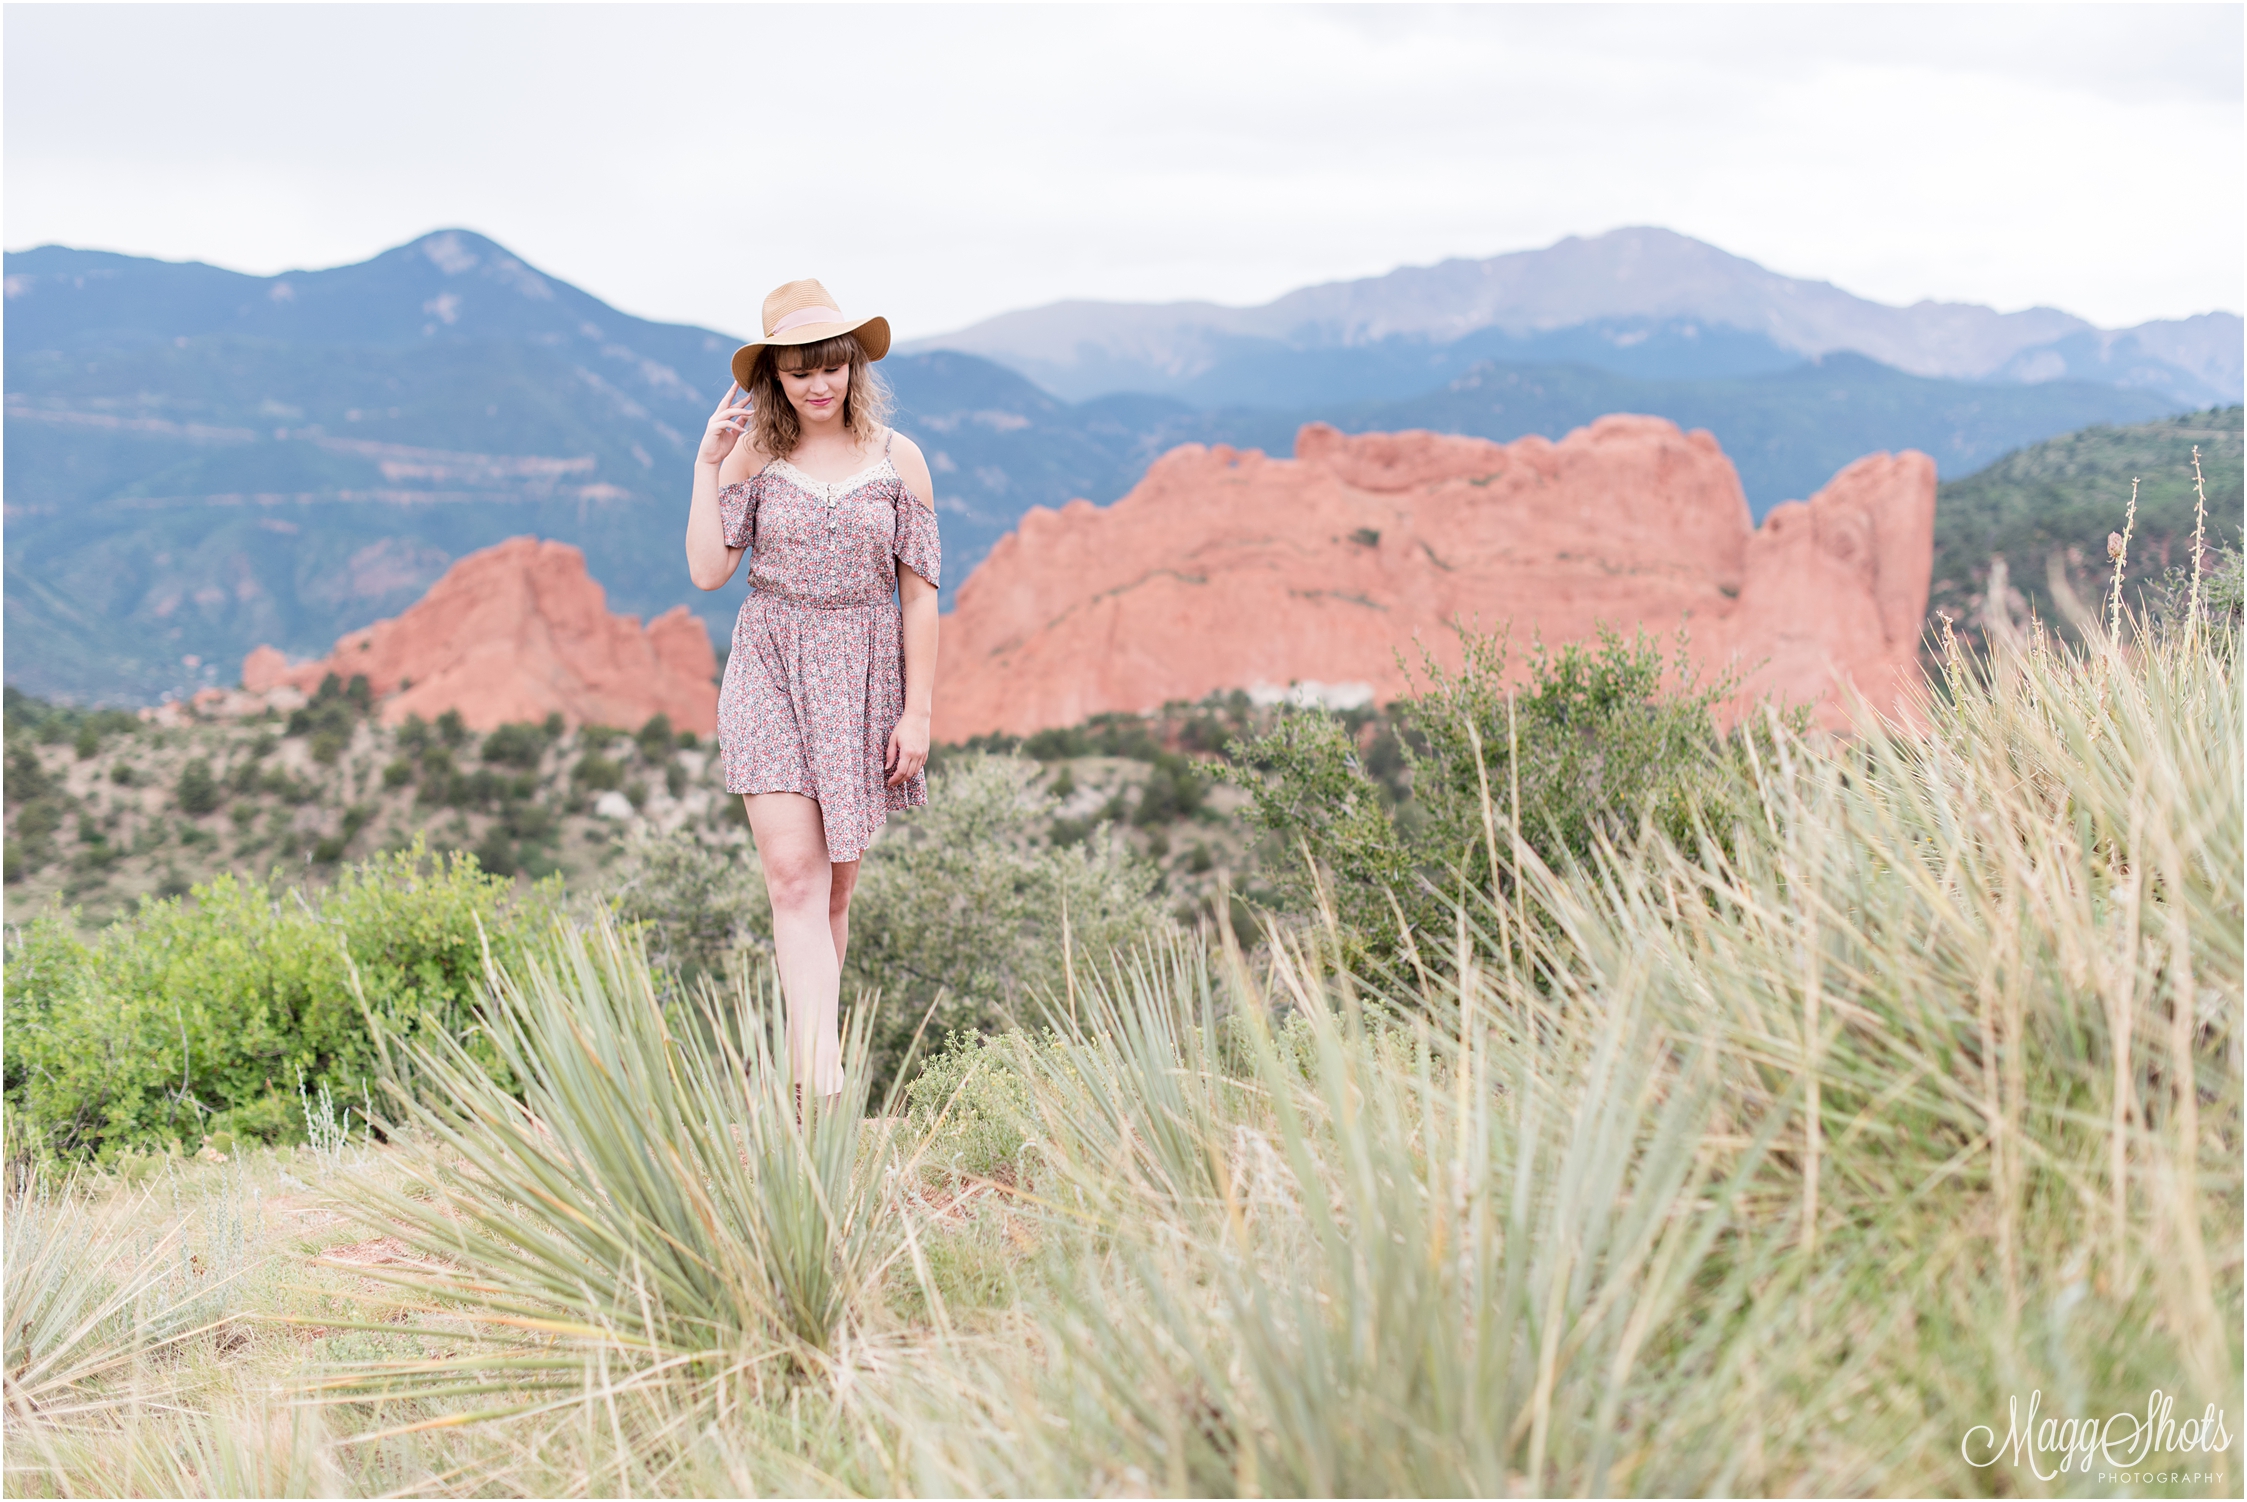 Girl Hat Dress Mountains Outdoors Colorado MaggShots Photography MaggShots Professional Photography Professional Photographer Garden of the Gods